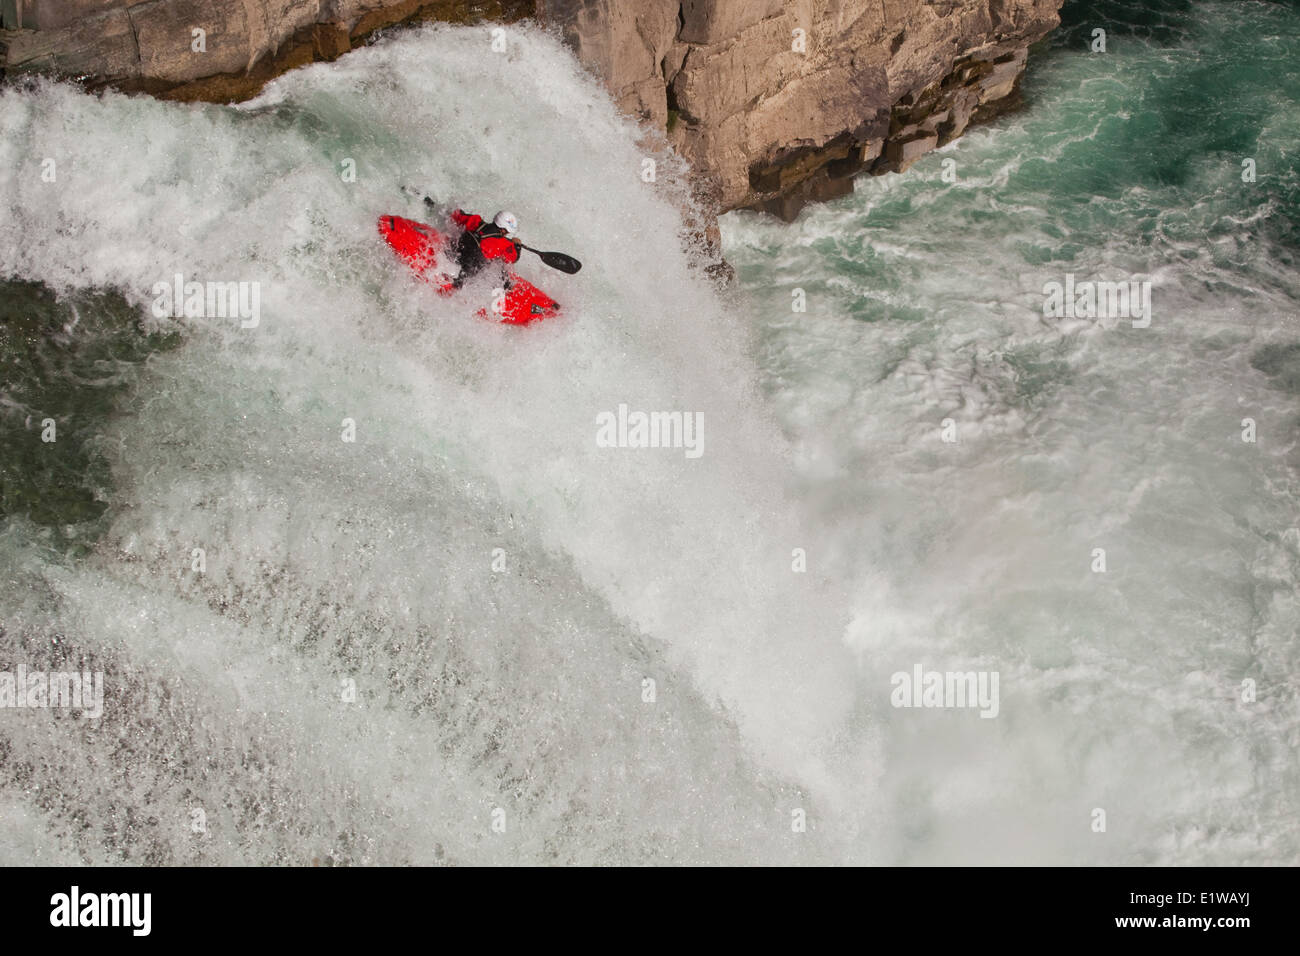 A male kayaker runs leap of faith, a 30 foot waterfall on the Upper Elk River, Fernie, BC Stock Photo